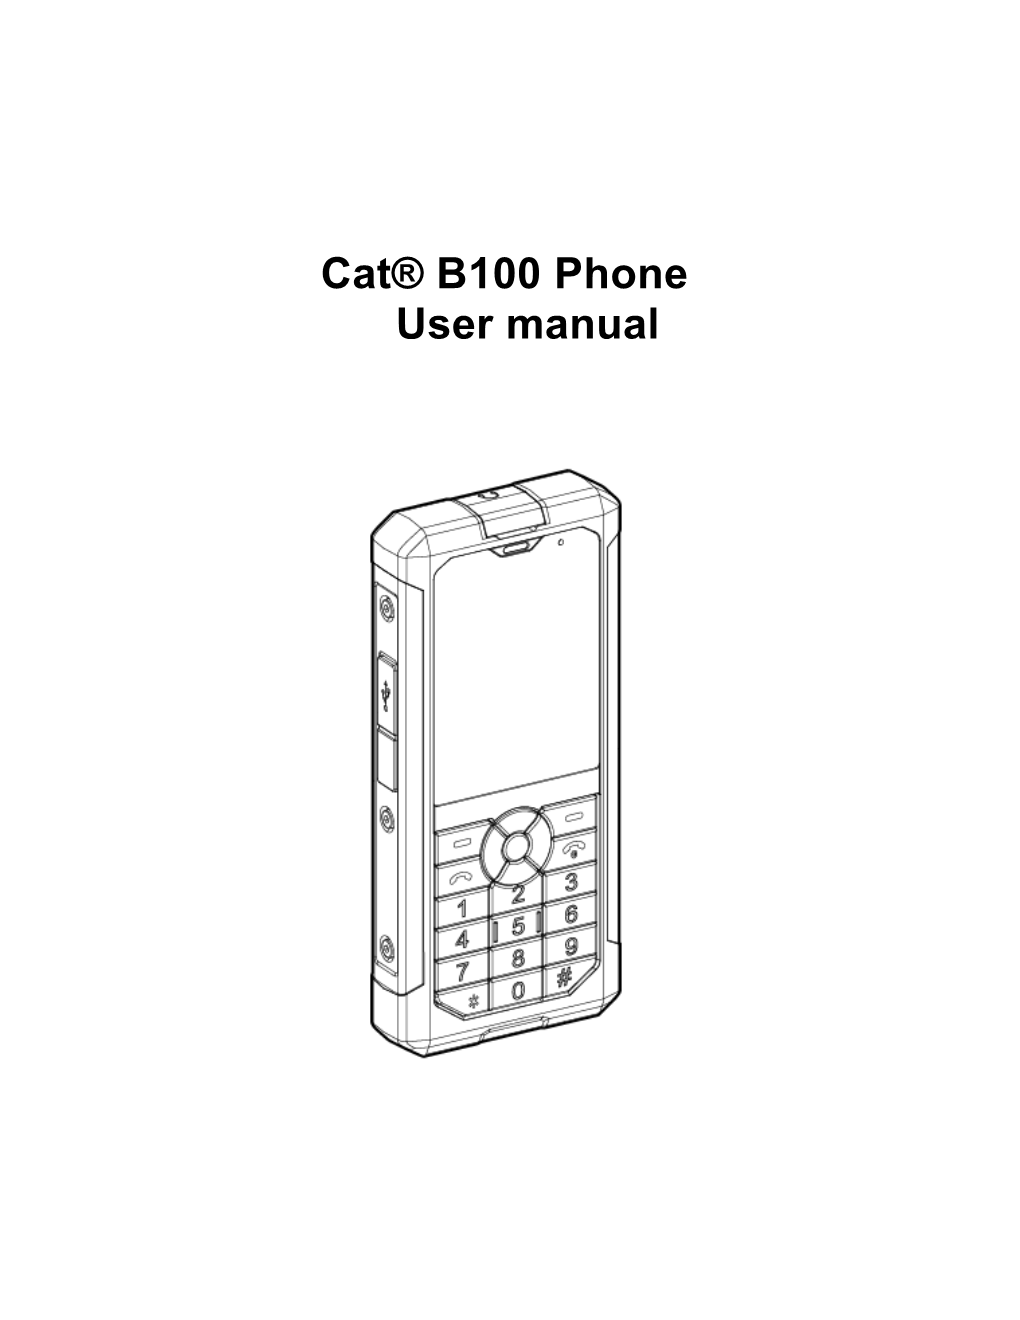 Cat® B100 Phone User Manual Please Read Before Proceeding Safety Precautions